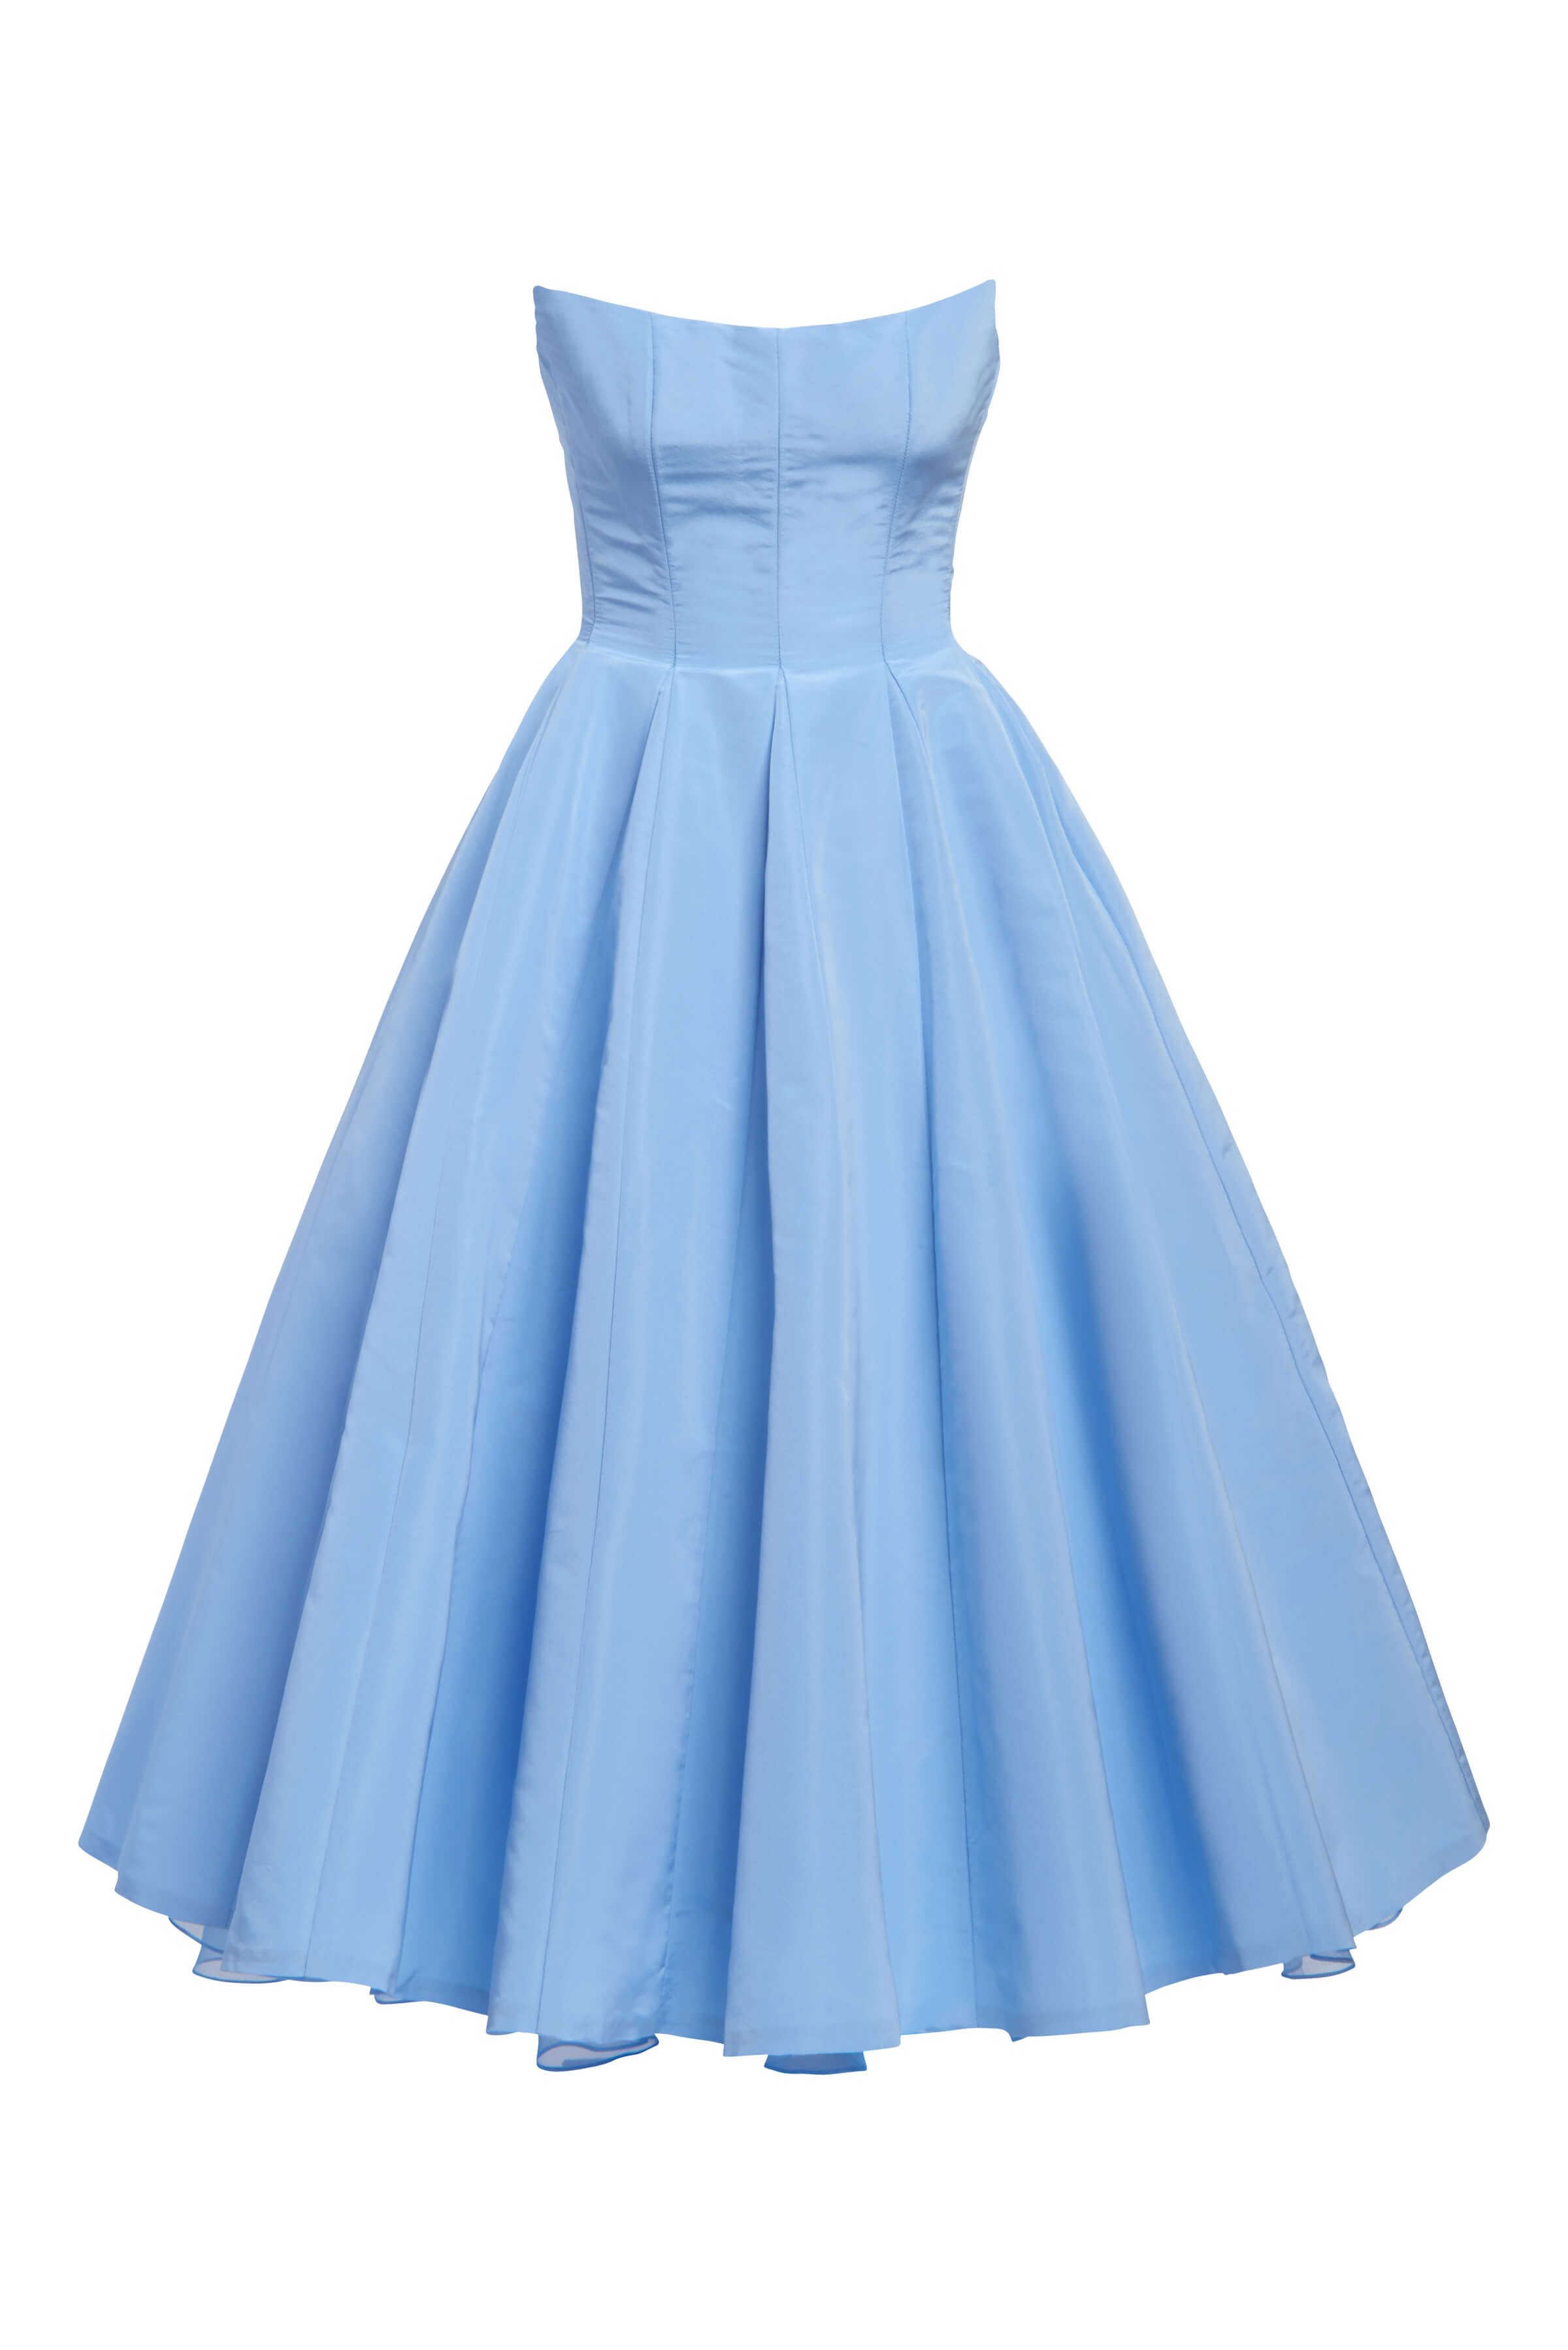 Blue Dresses for Special Occasions